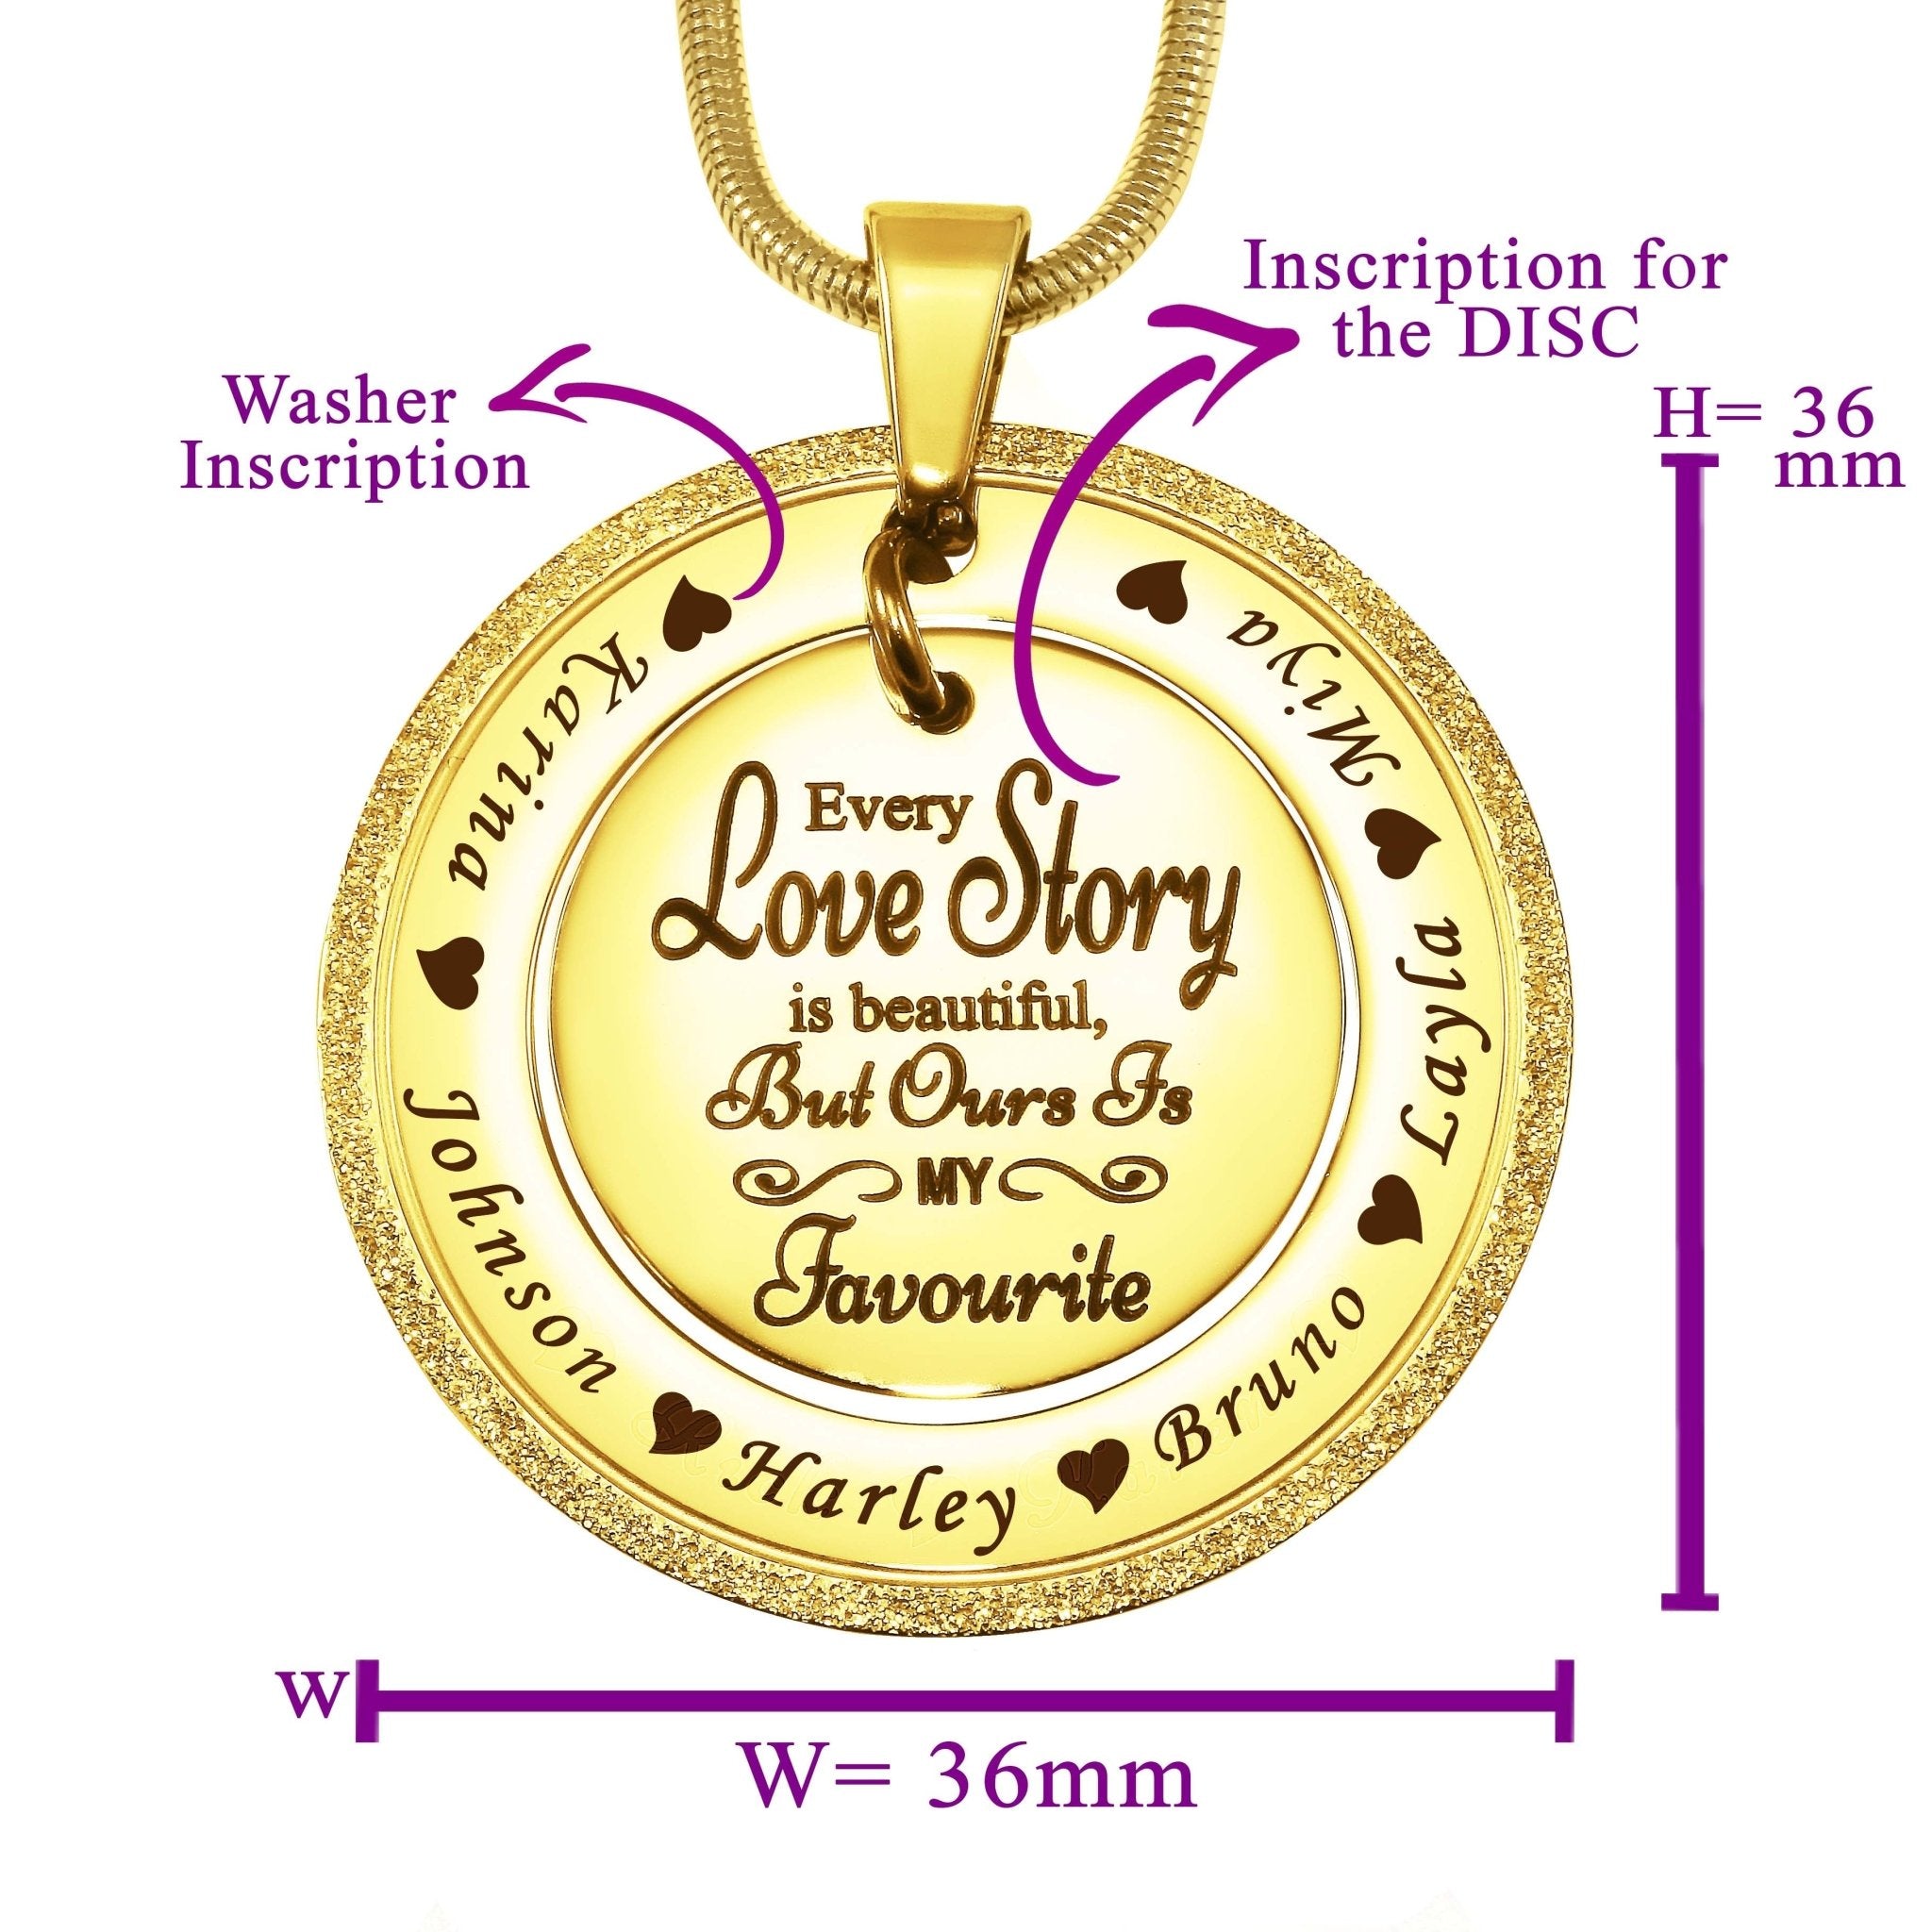 Sparkling Love Story Necklace - Mothers Jewellery by Belle Fever